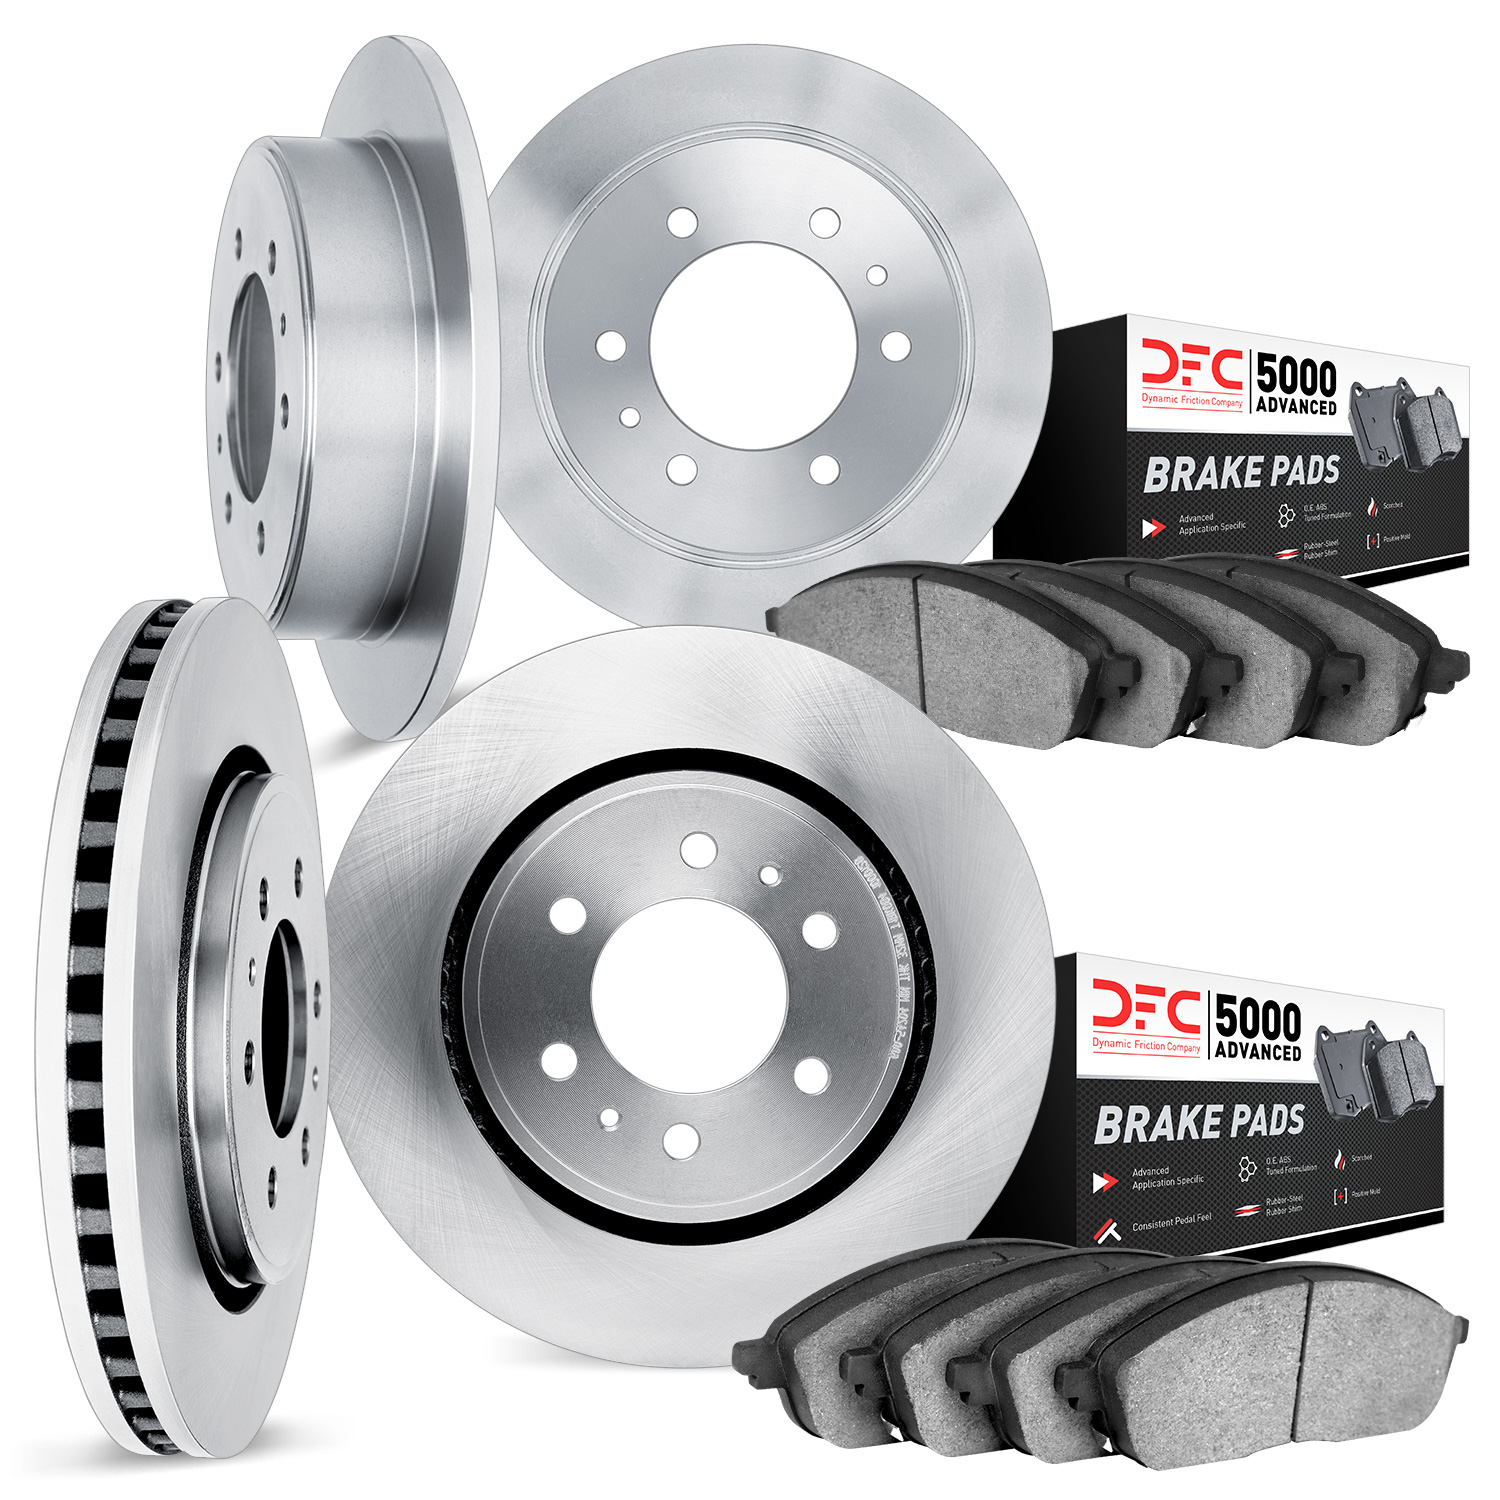 6504-52025 Brake Rotors w/5000 Advanced Brake Pads Kit, 2006-2009 GM, Position: Front and Rear